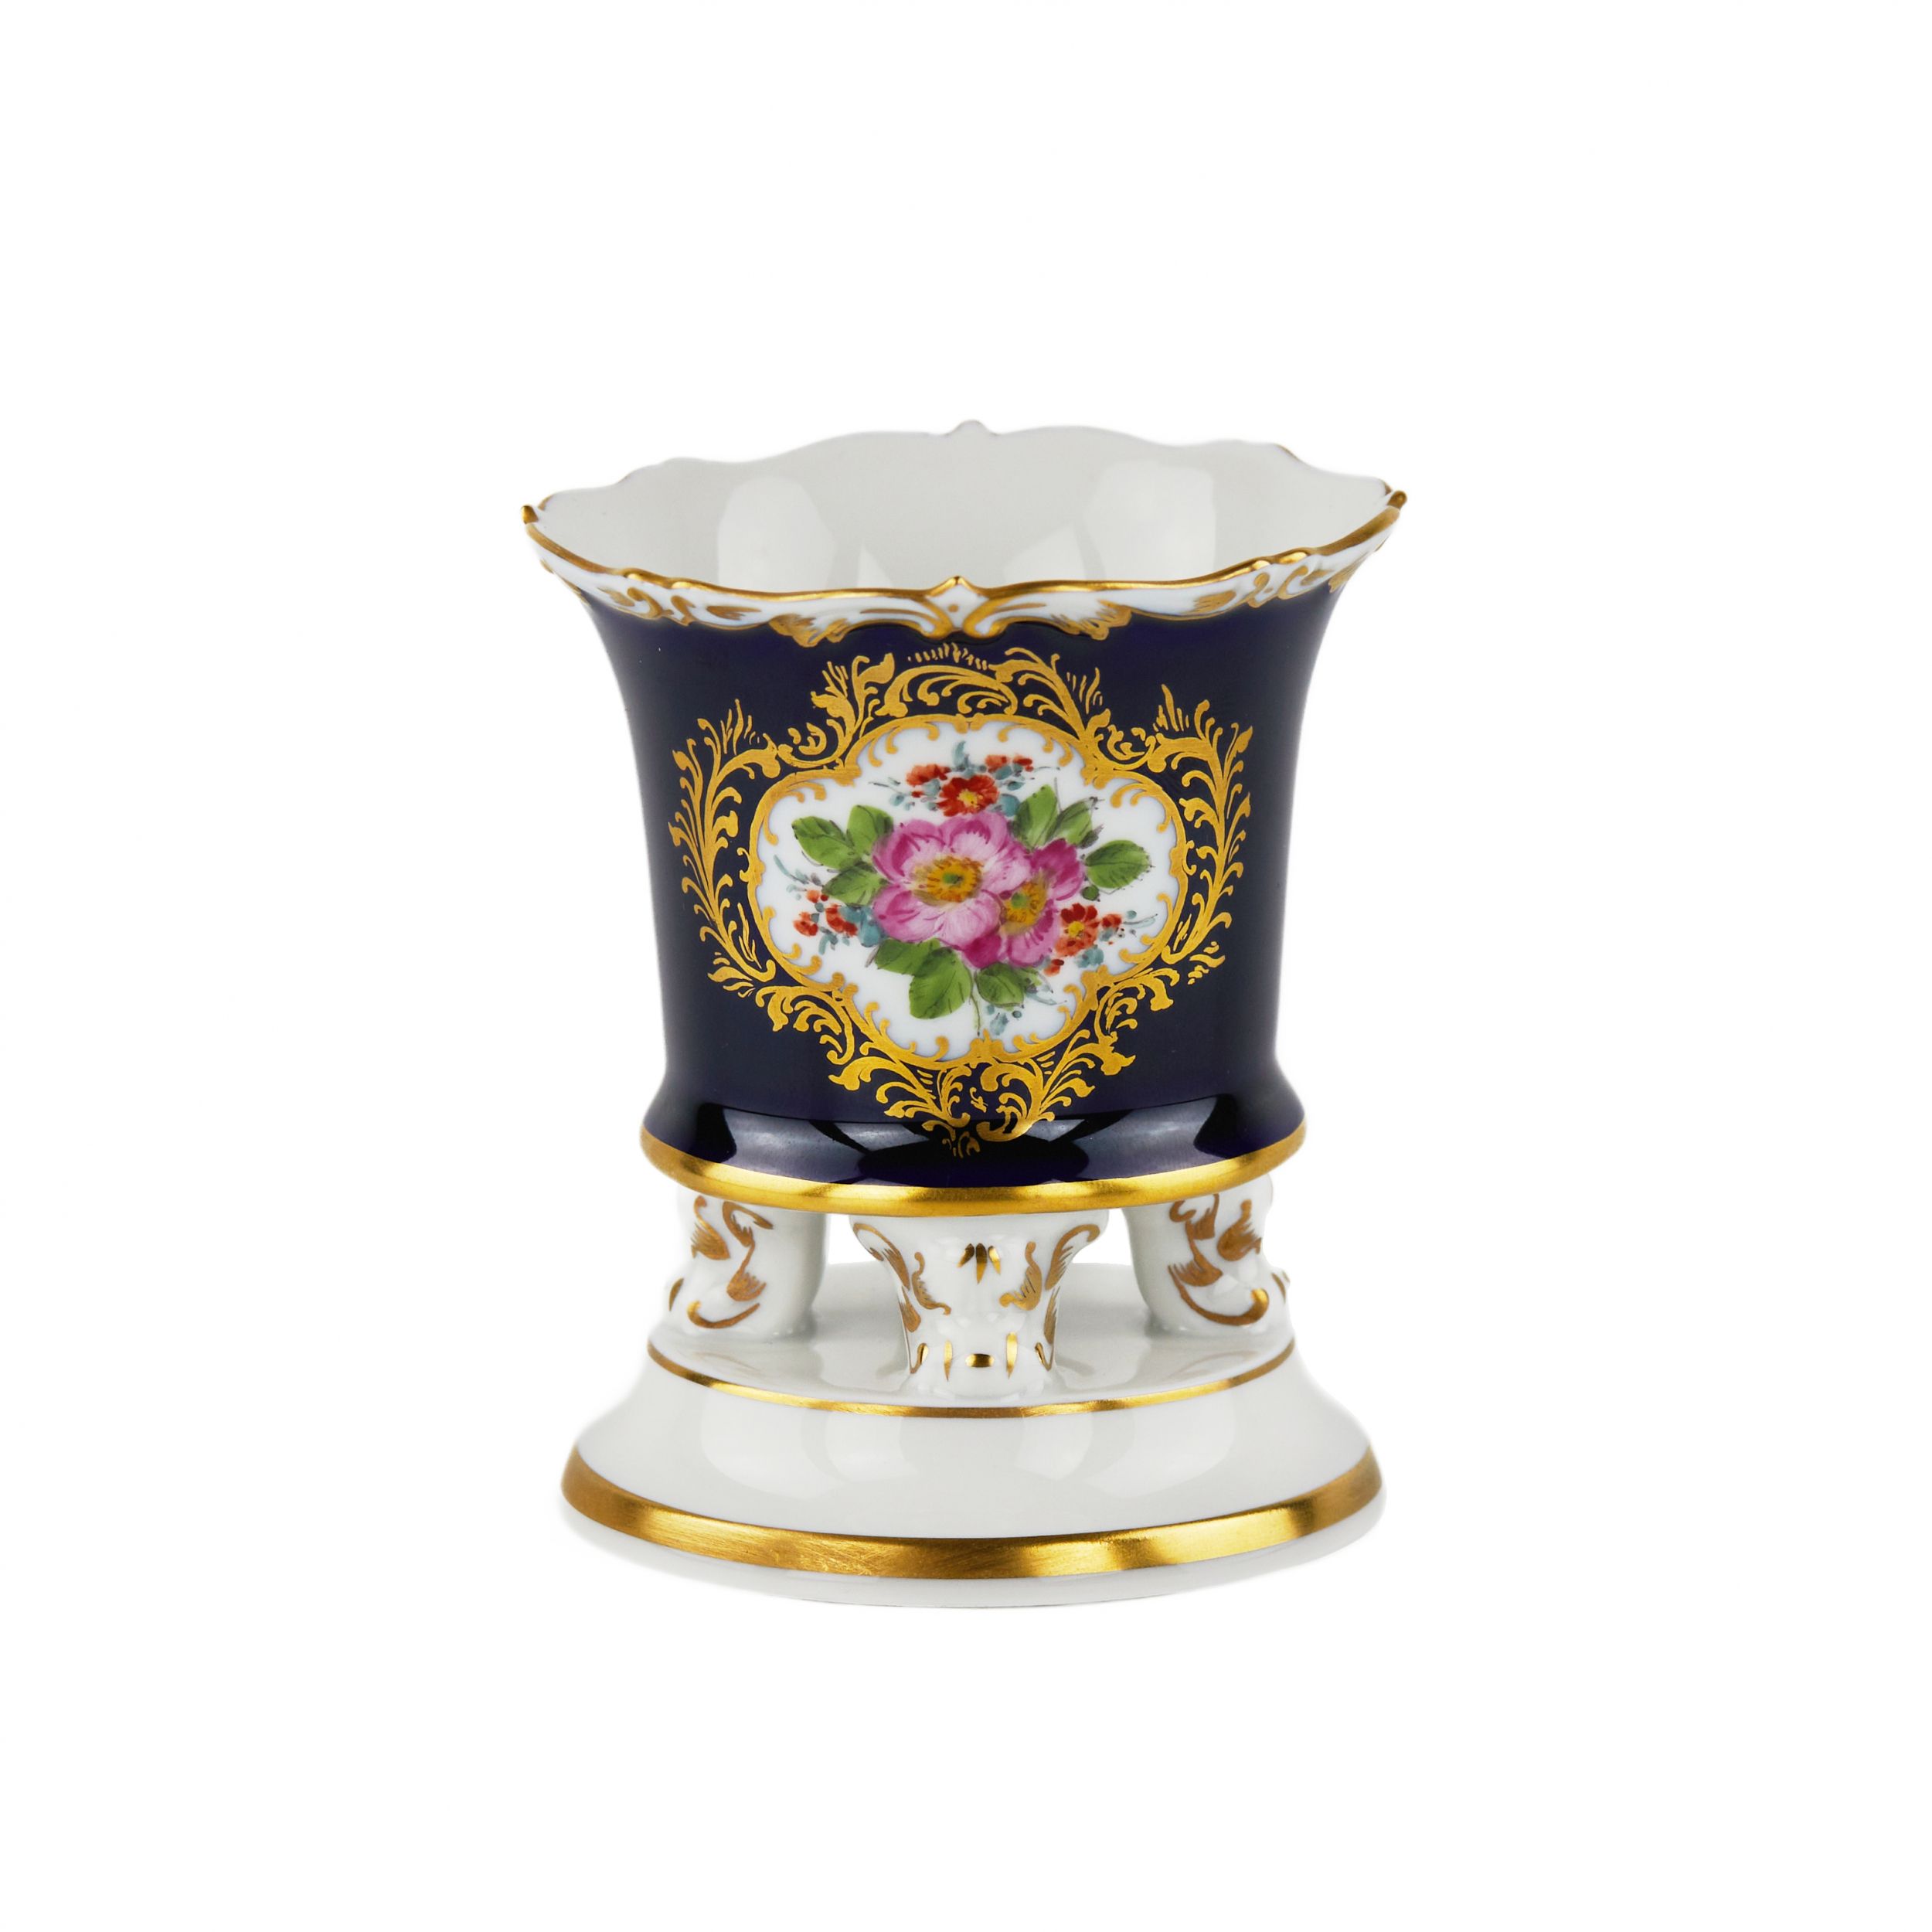 A-small-vase-on-four-figured-legs-resting-on-a-round-pedestal-Meissen-manufactory